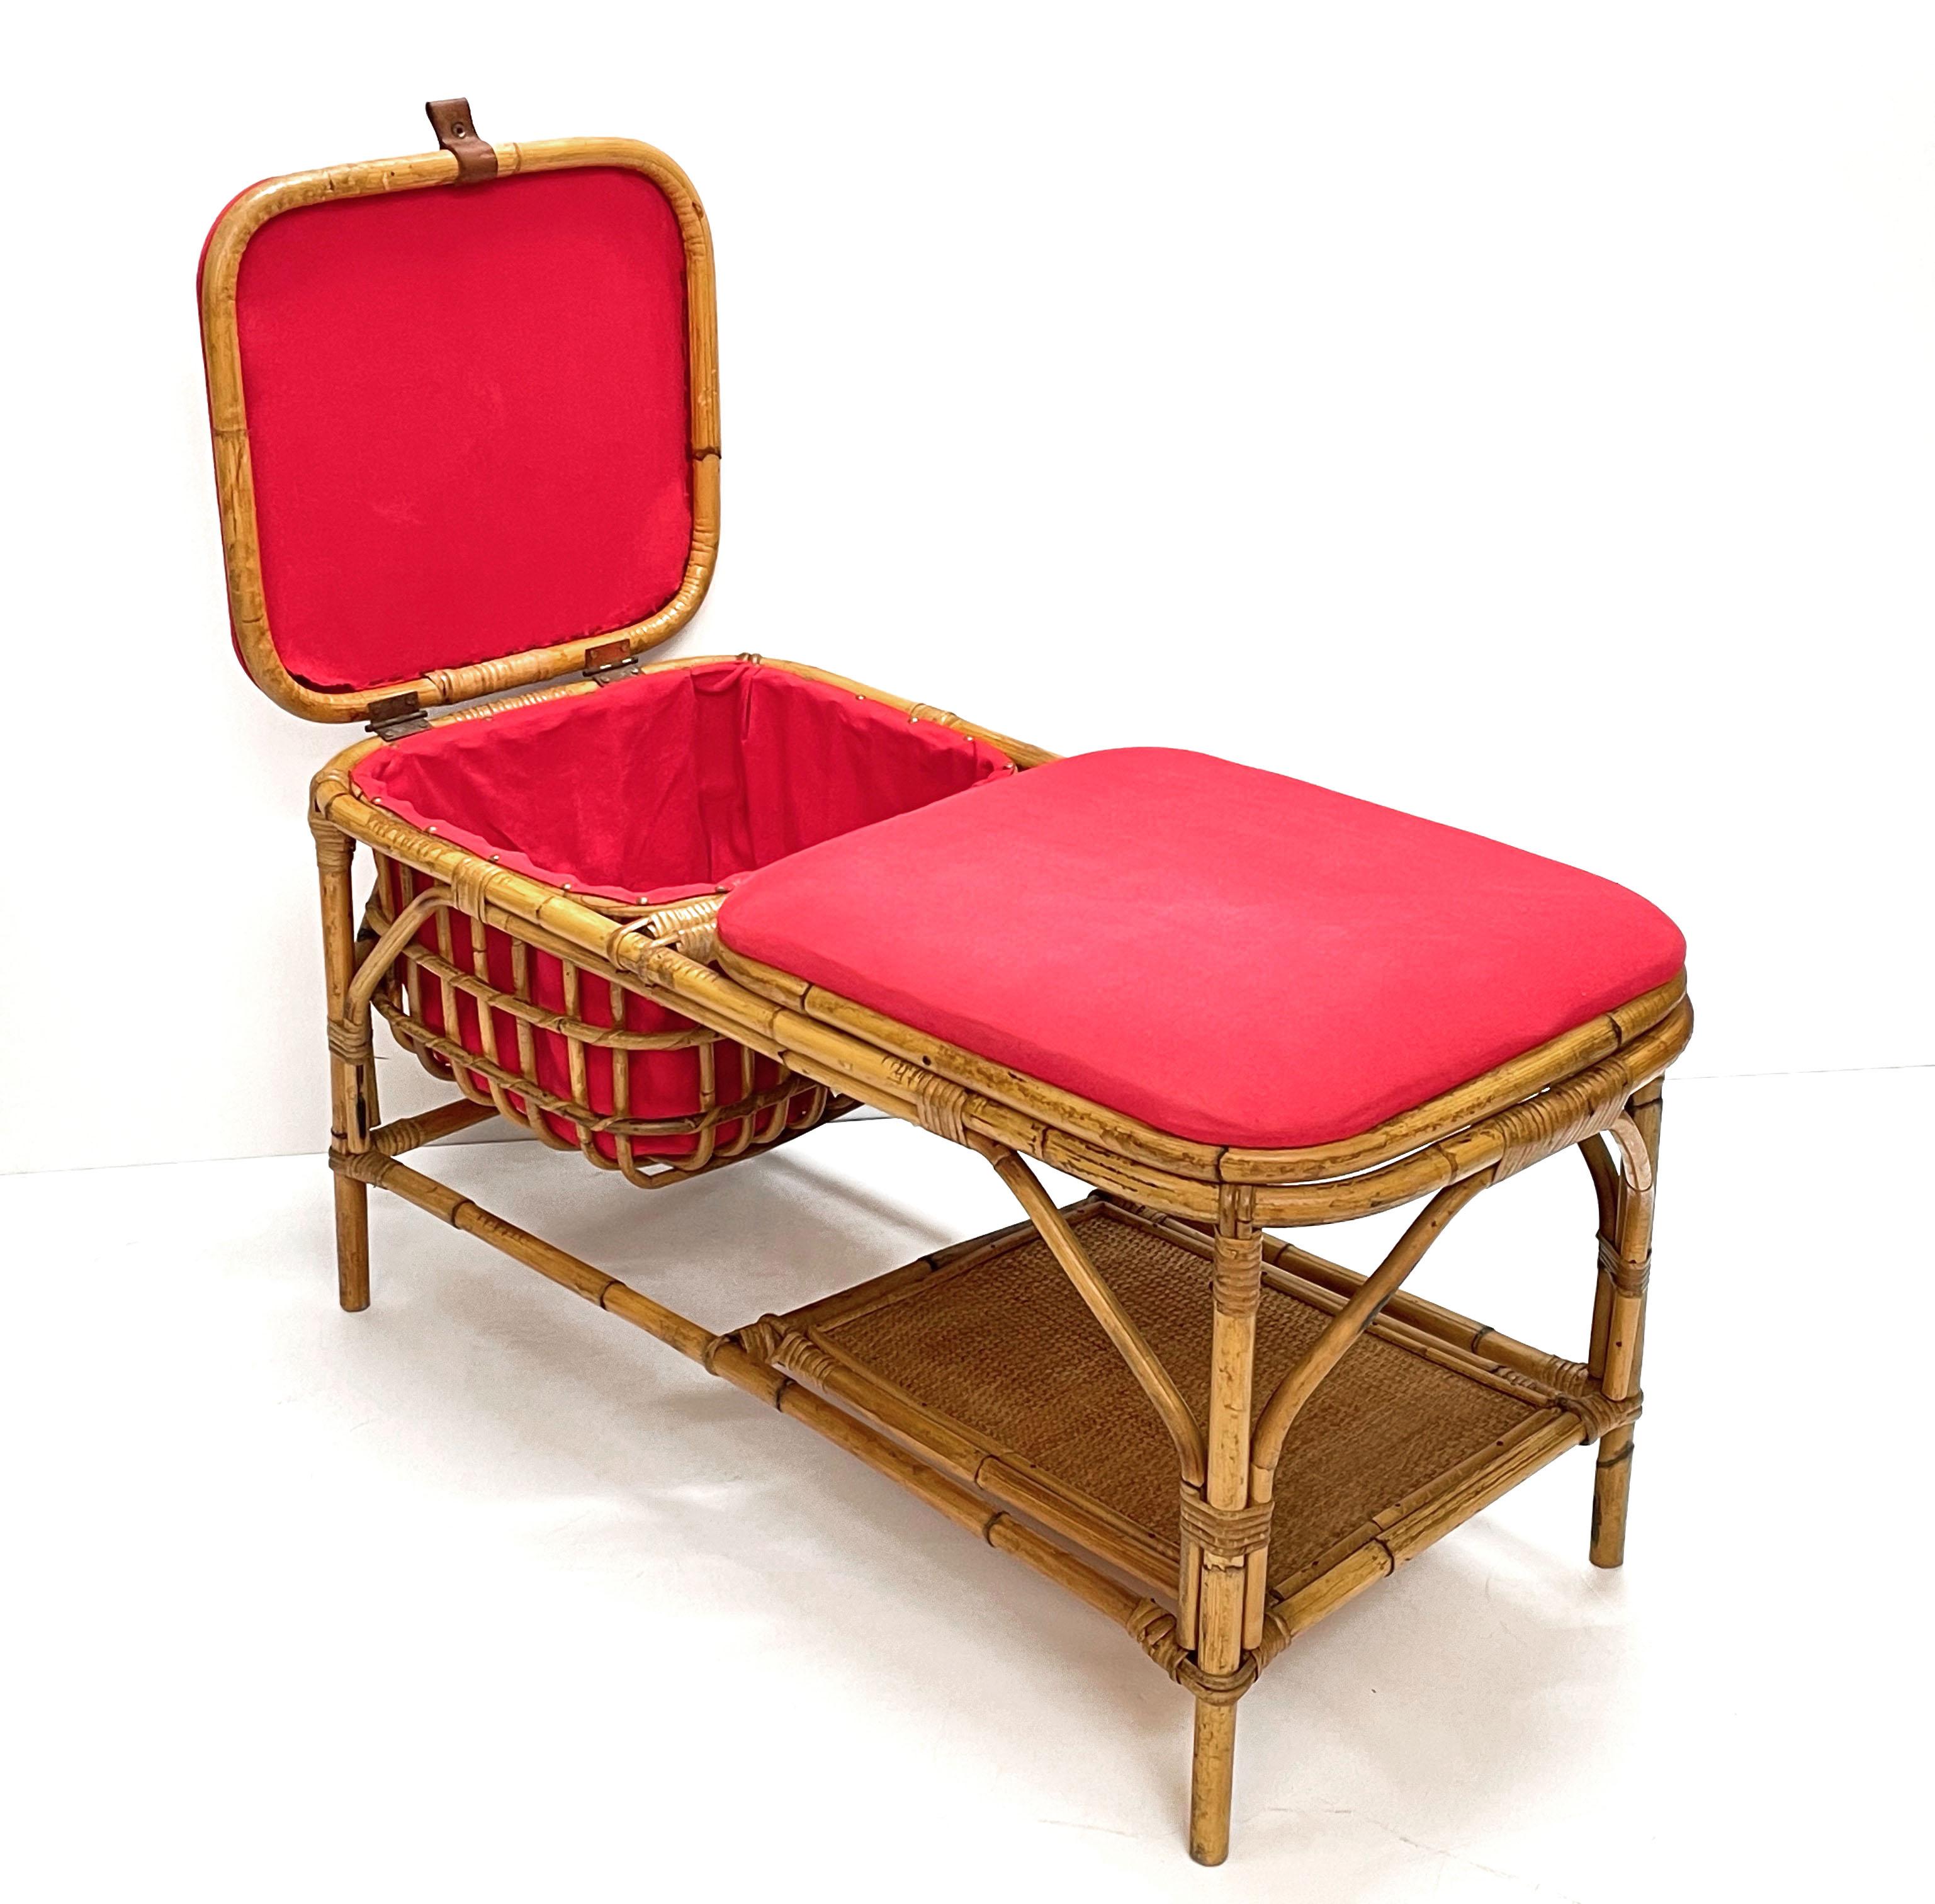 20th Century Midcentury Bamboo and Rattan Italian Bench with Box Case, 1950s For Sale